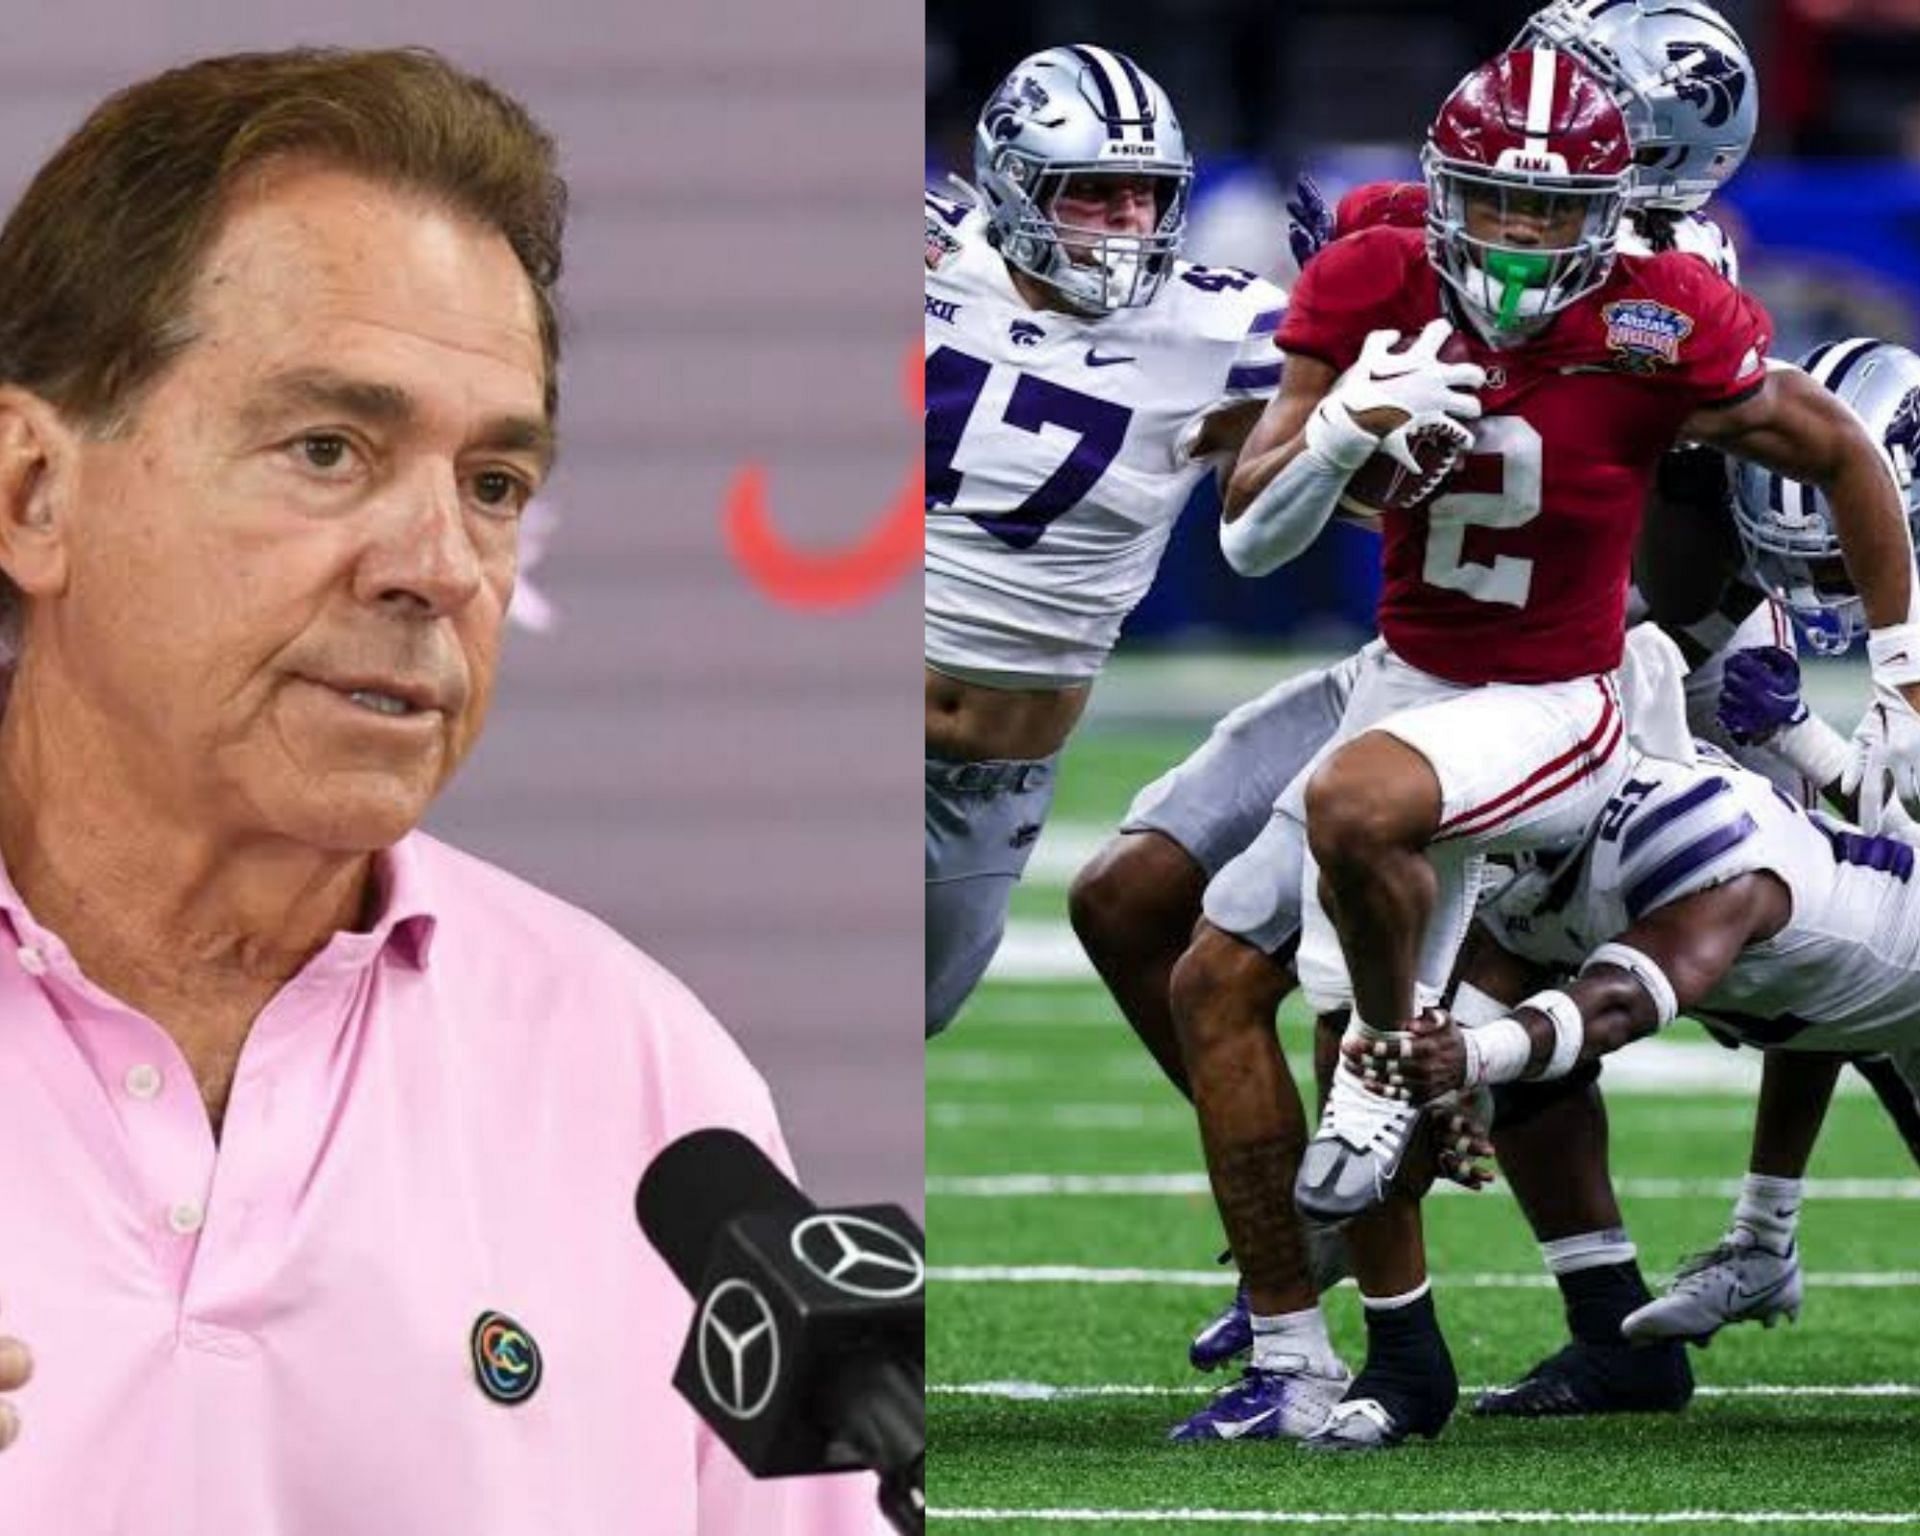 Look the dynasty is over': CFB world responds to Alabama